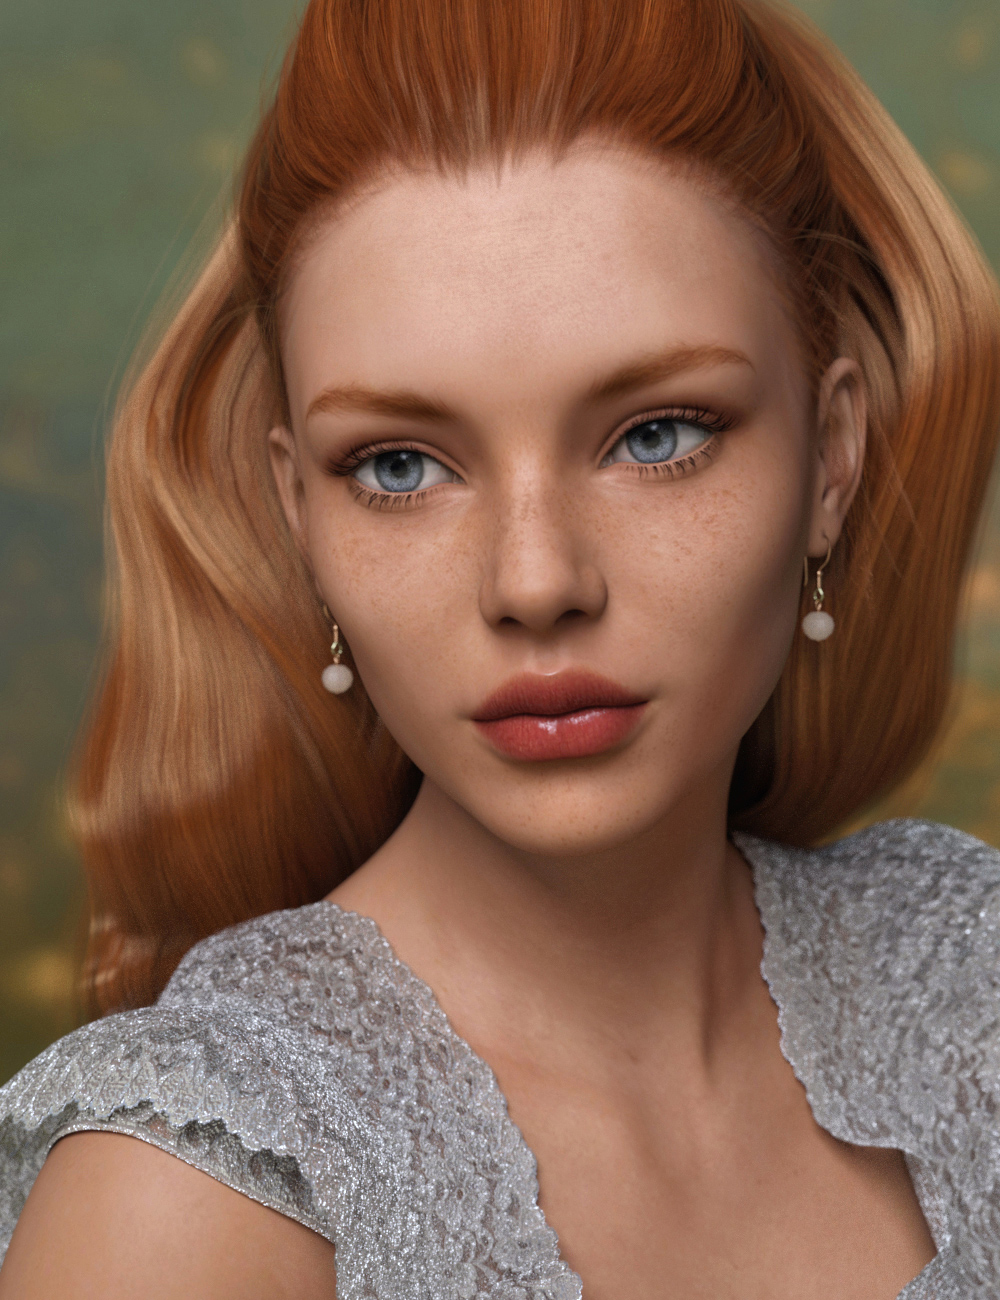 Sienna for Genesis 3 Female and Genesis 8 Female by: addy, 3D Models by Daz 3D